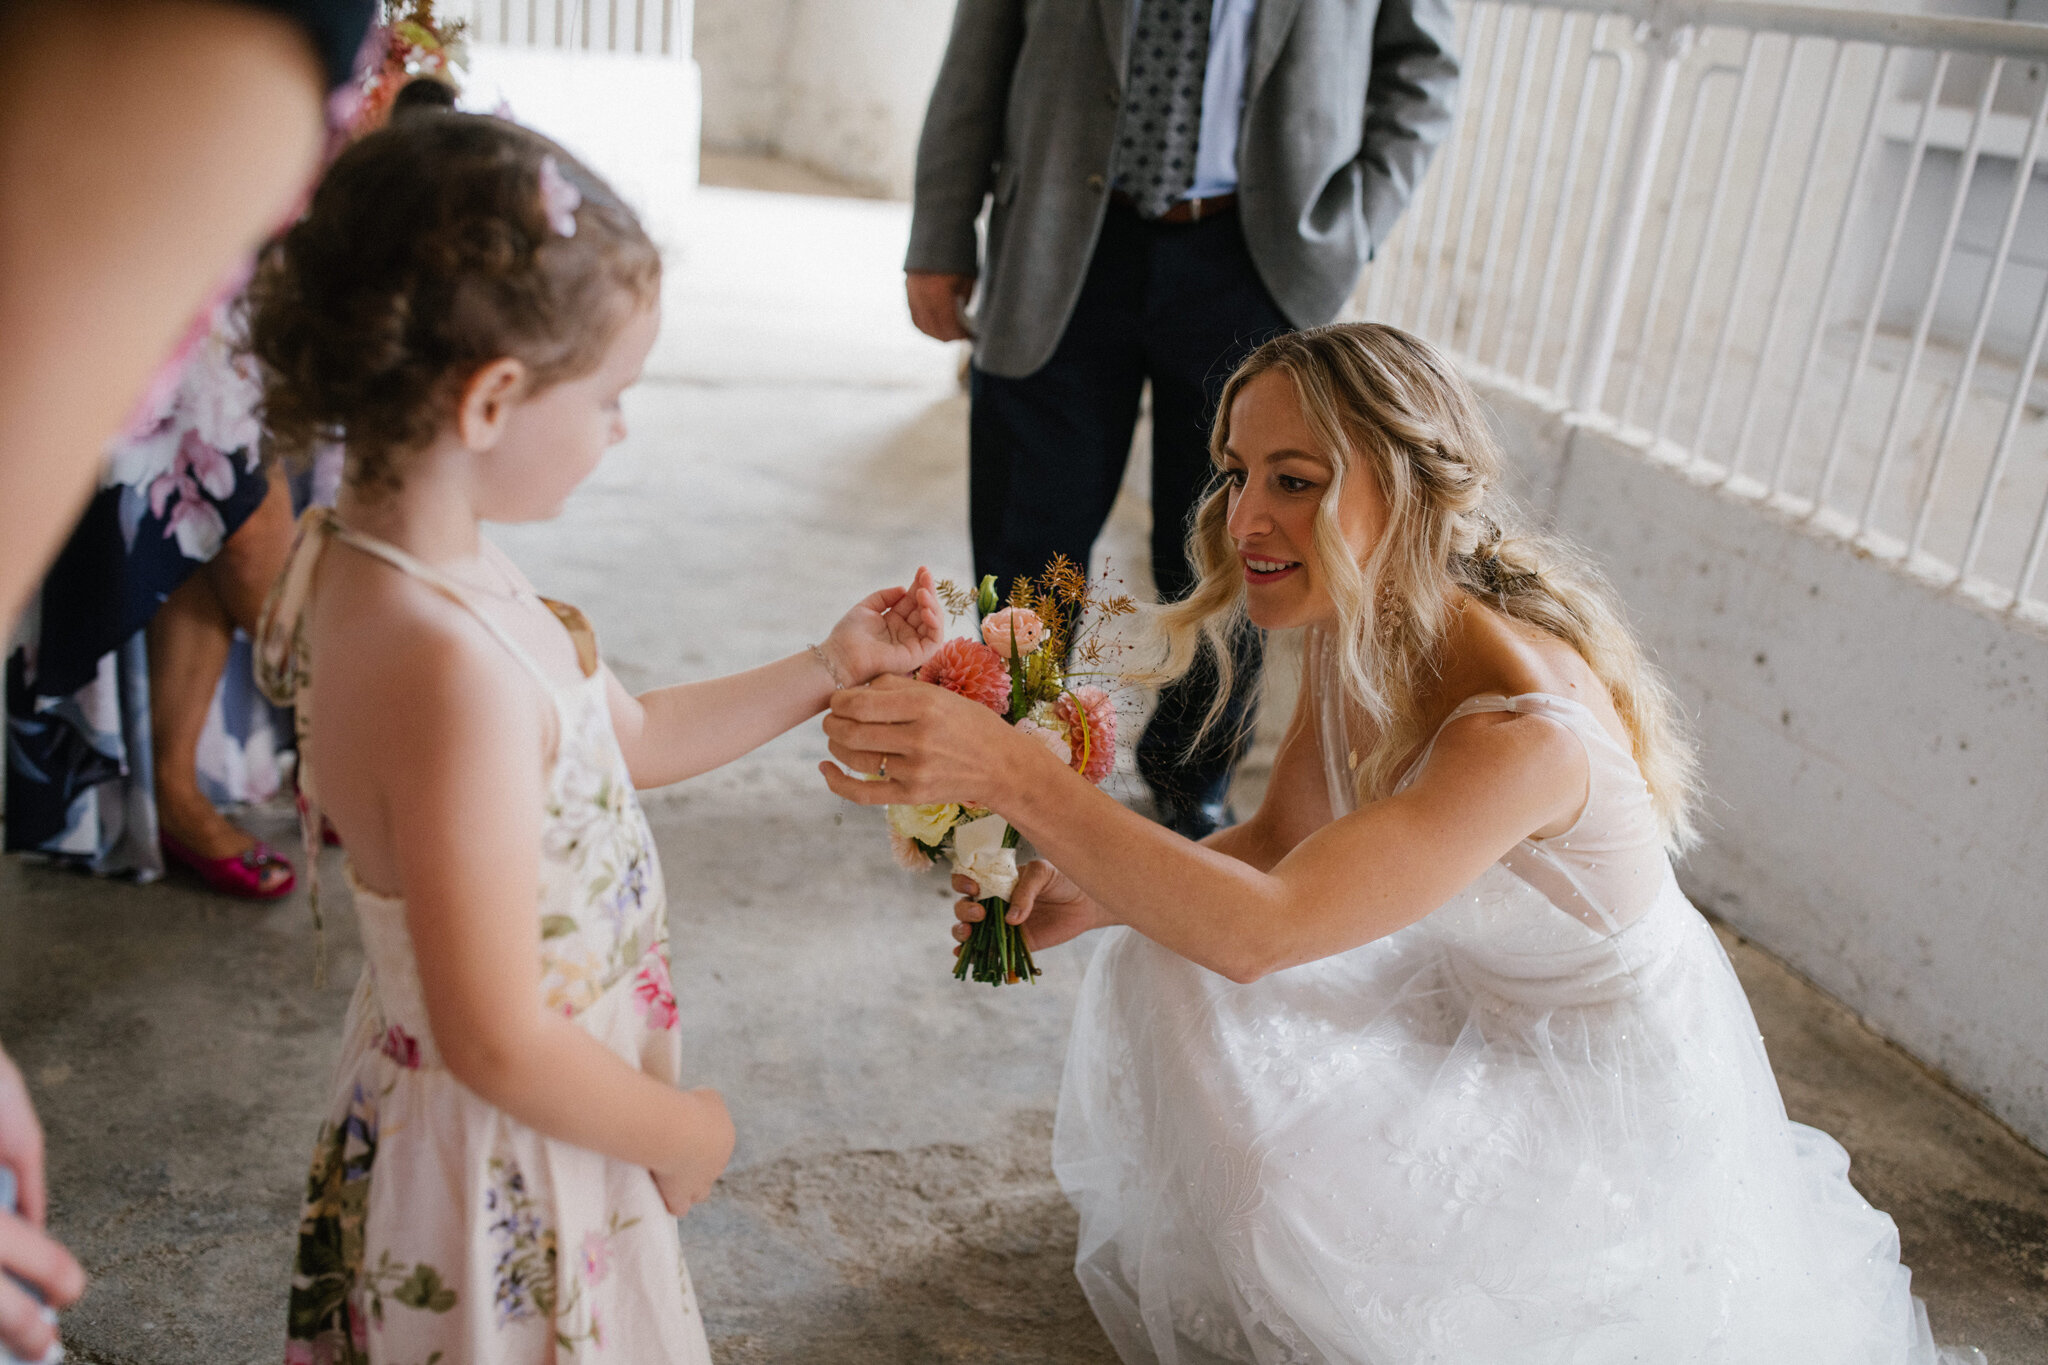 Bride with flower girl Euclid Design Co. flowers